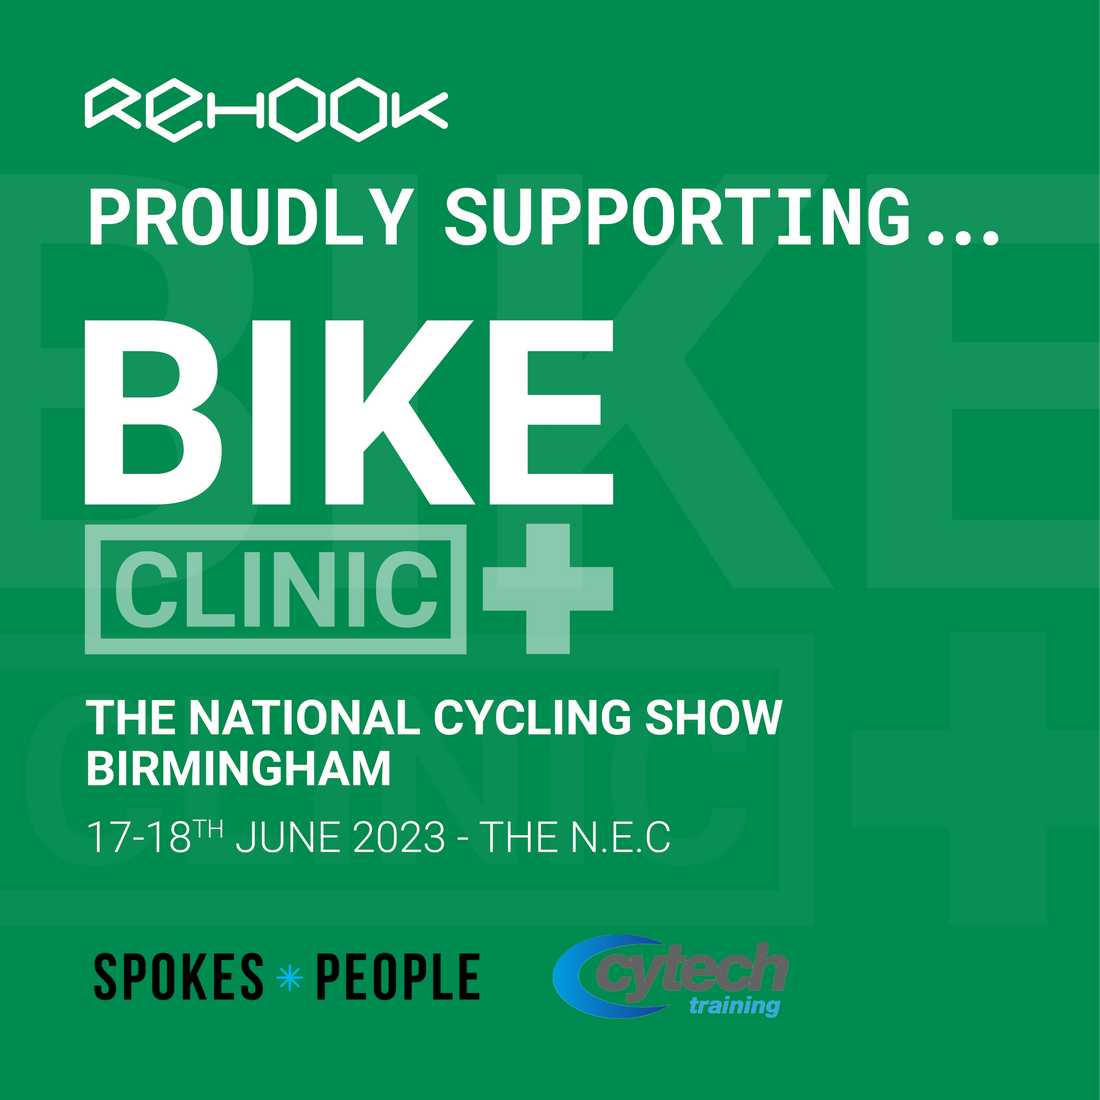 Supporting The Bike Clinic